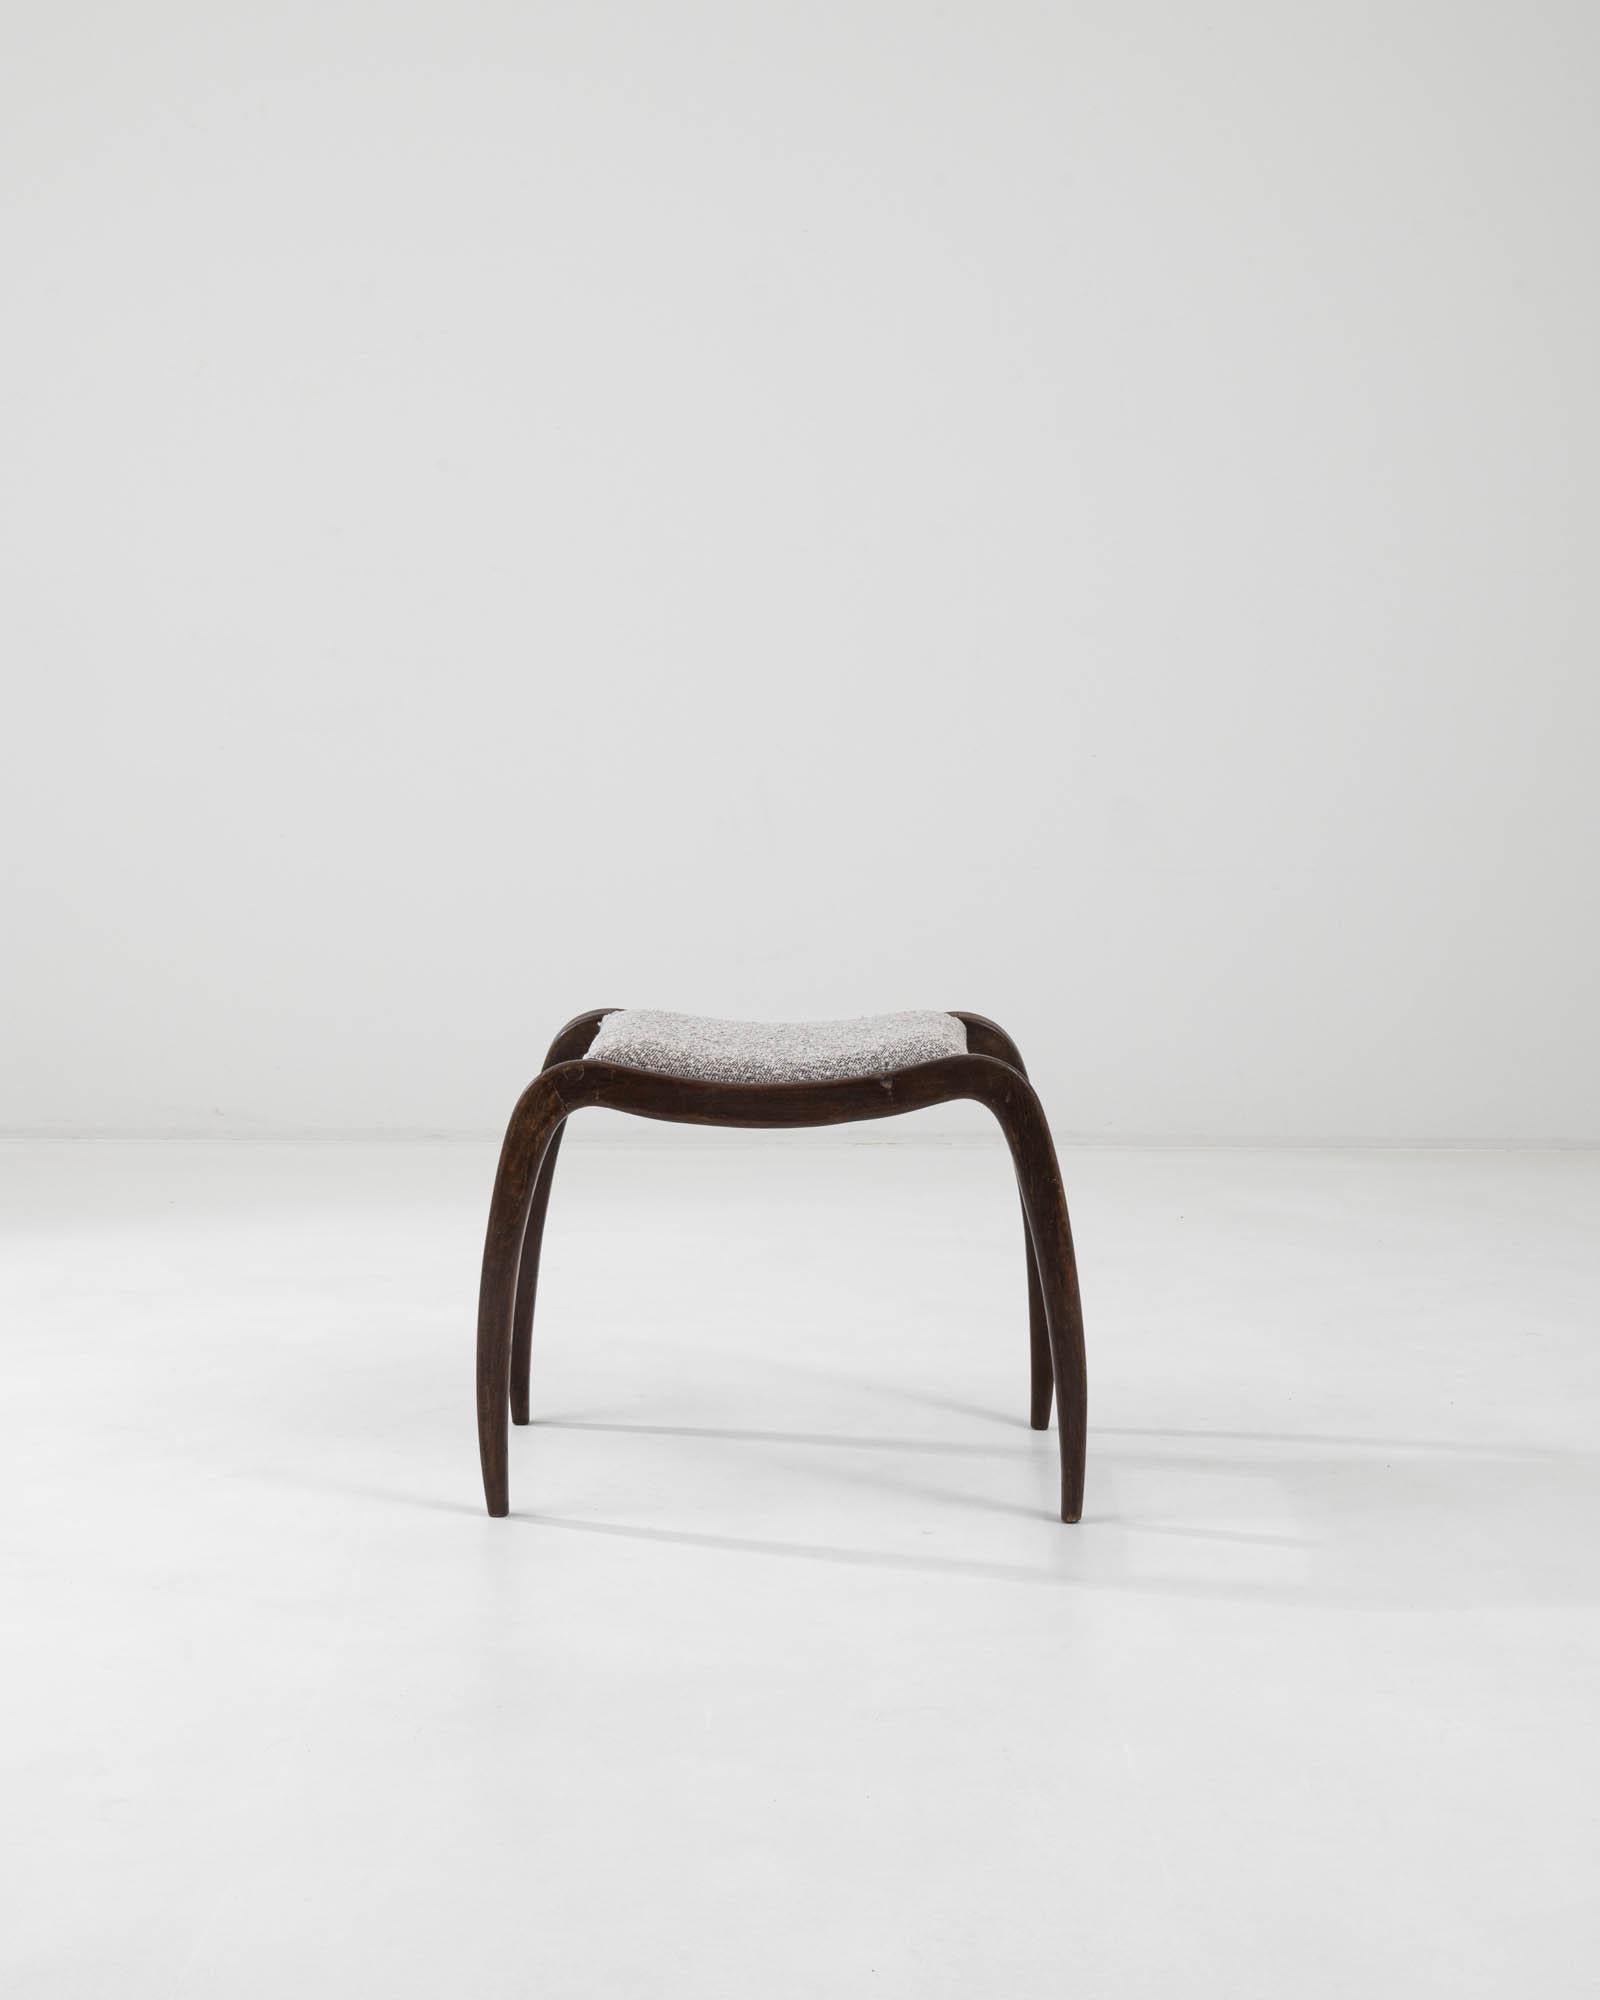 A captivating piece that embodies the essence of Mid-Century Central European design, this petite stool gracefully combines forthright utility with an effortlessly sleek demeanor, making it a delightful addition to any living space.

With a design